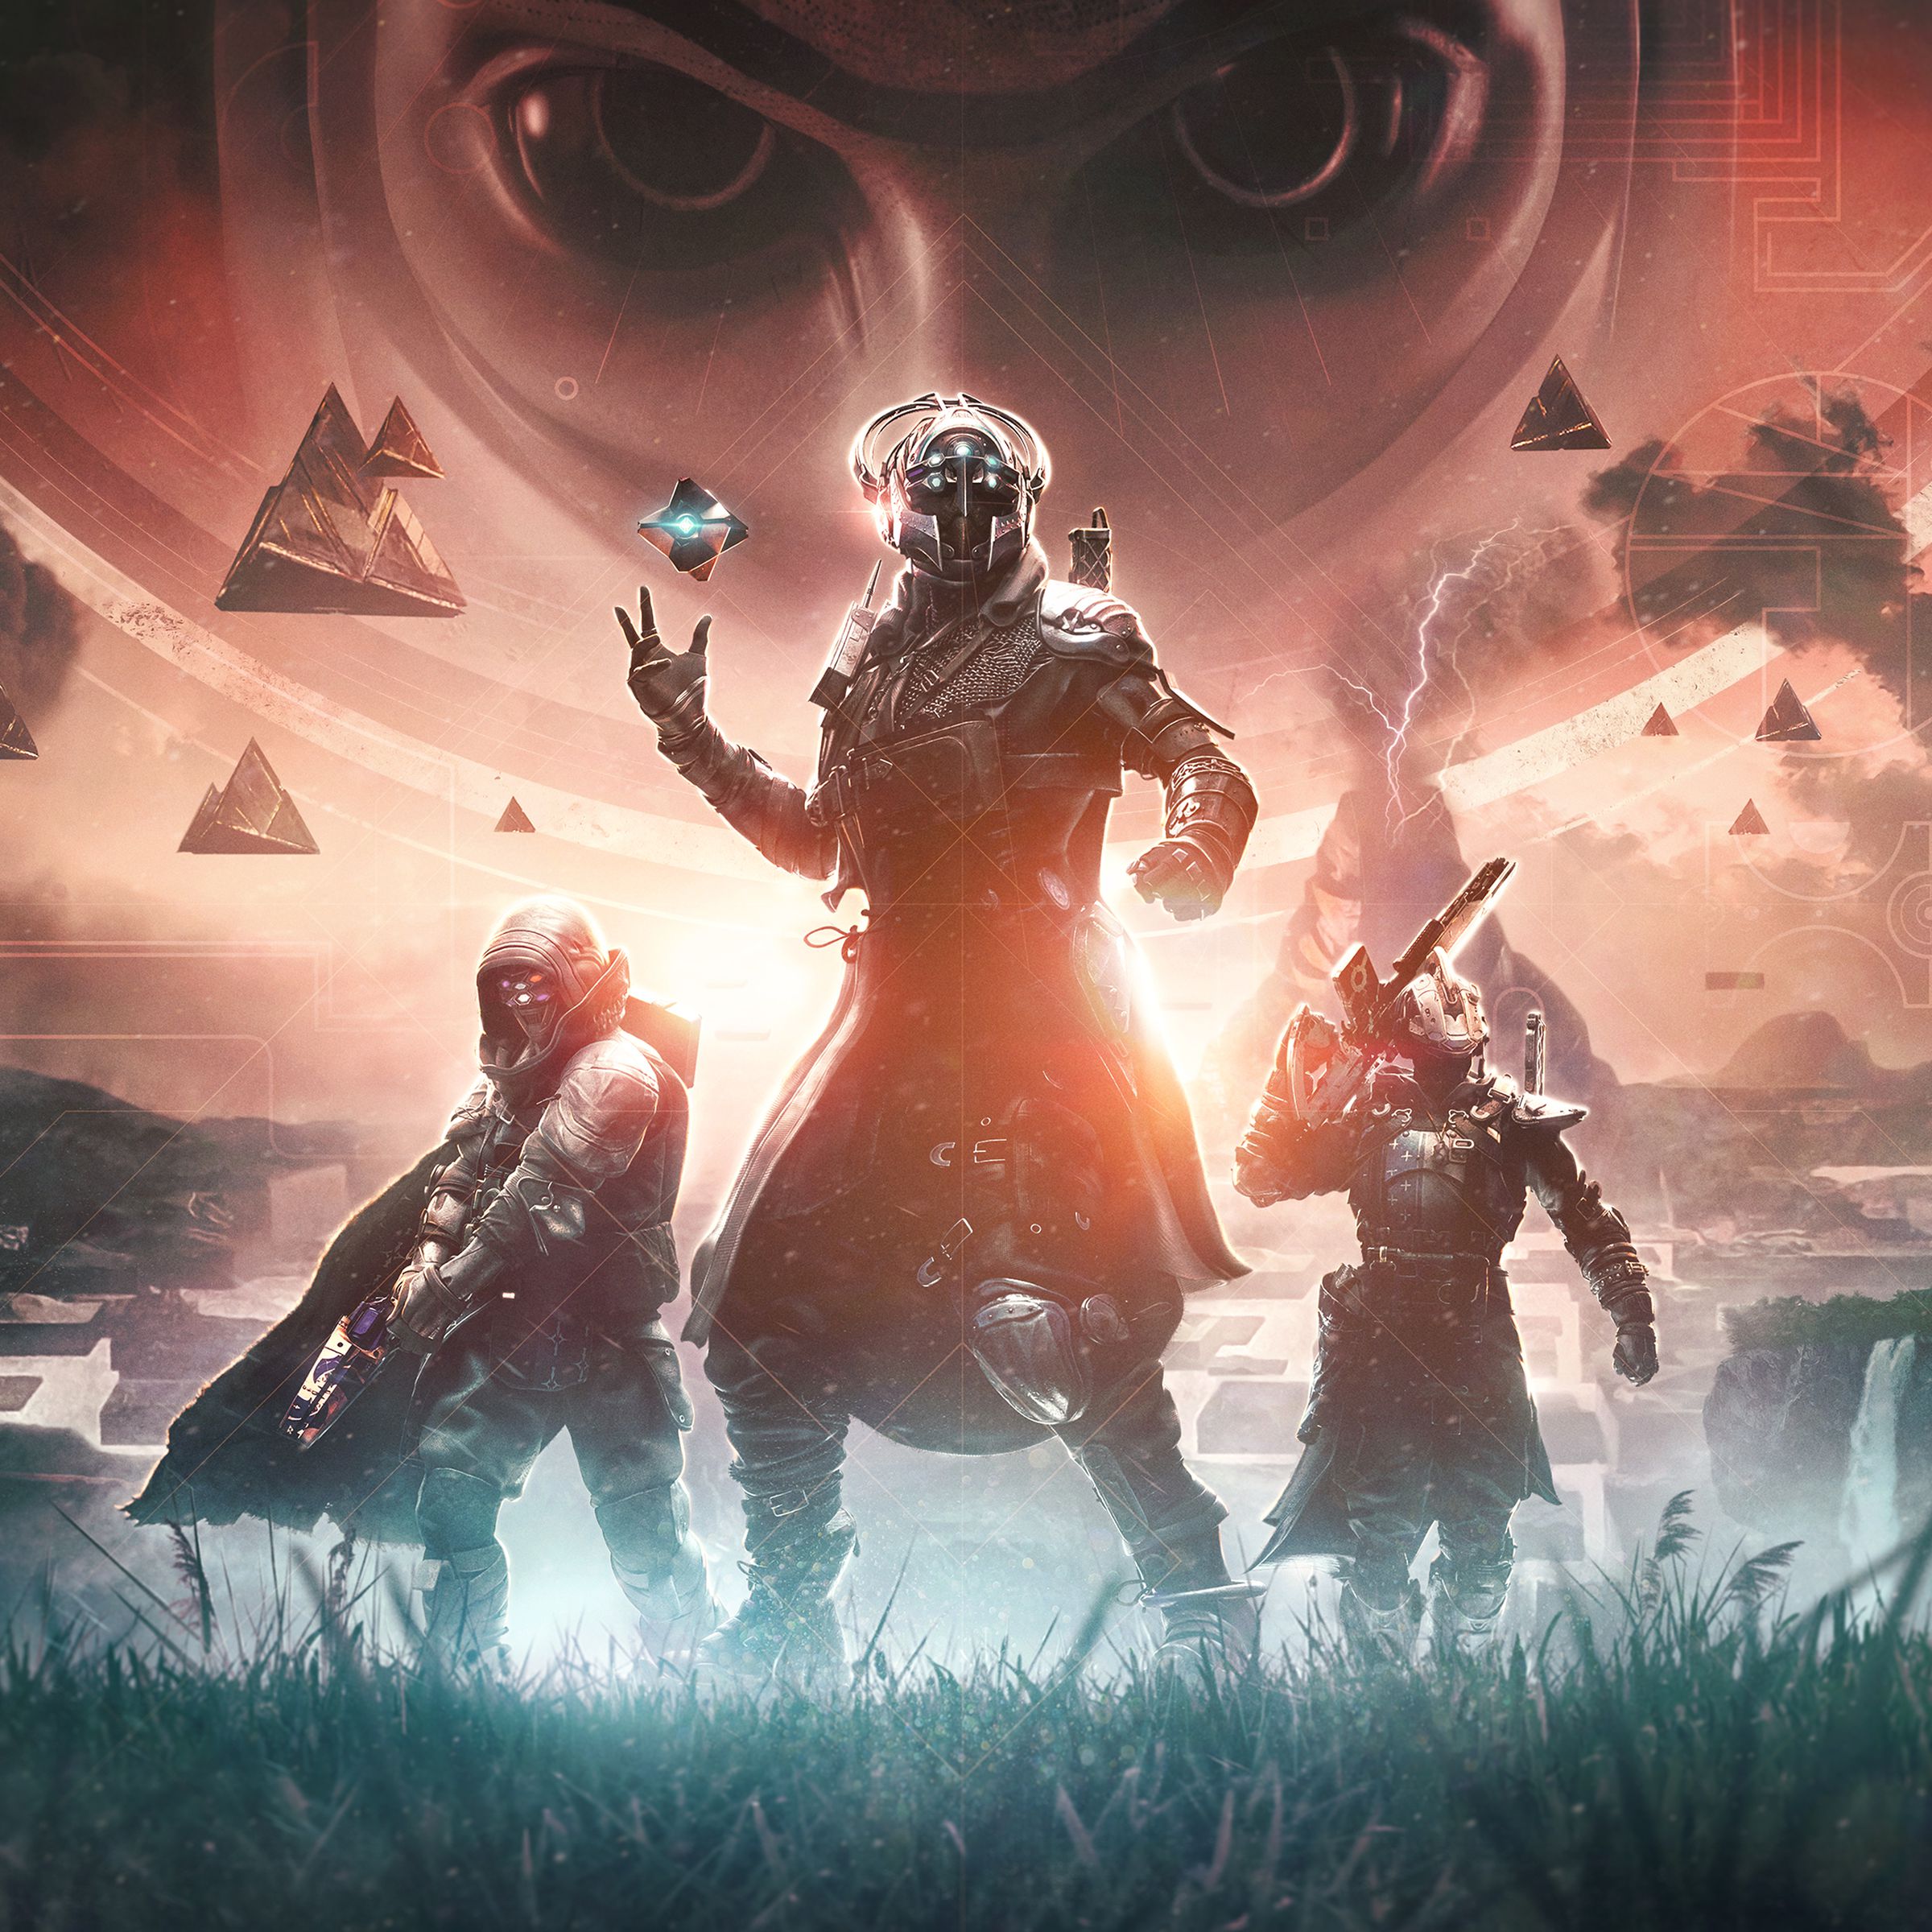 Illustration of Destiny 2 characters looking into the distance in a cool pose as a figure overhead glares ominously with beady eyes